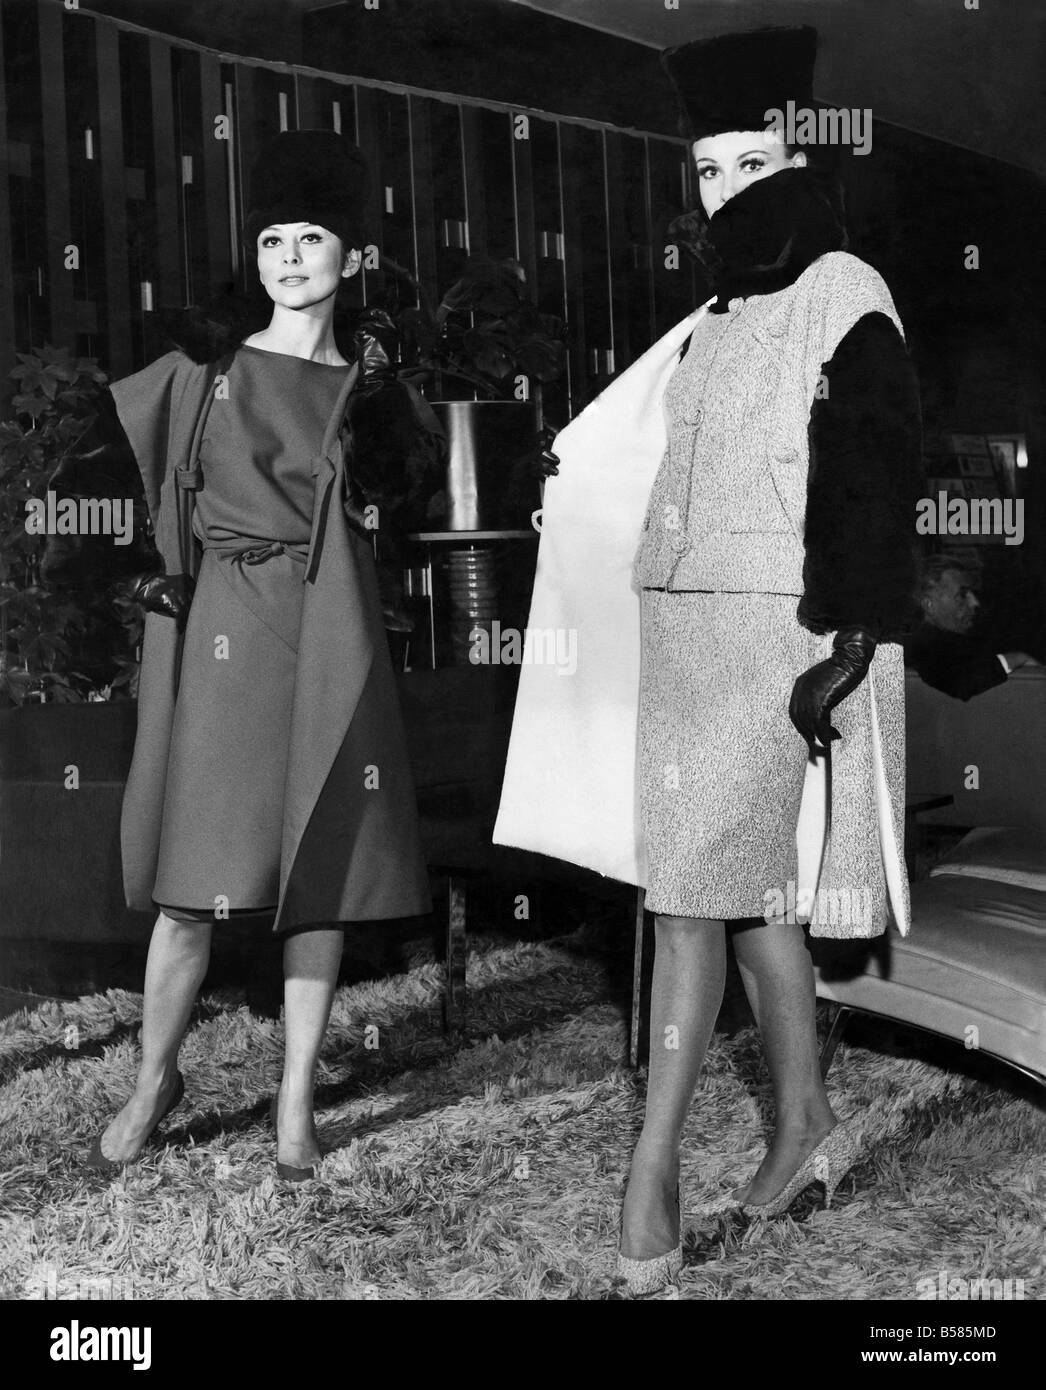 Clothing Misc. 1963: Alaskan seal fur hat, collar and suit sleeves. Toped with sleeveless coat in matching tweed. Designed by Trevira Studio. November 1963 P006790 Stock Photo